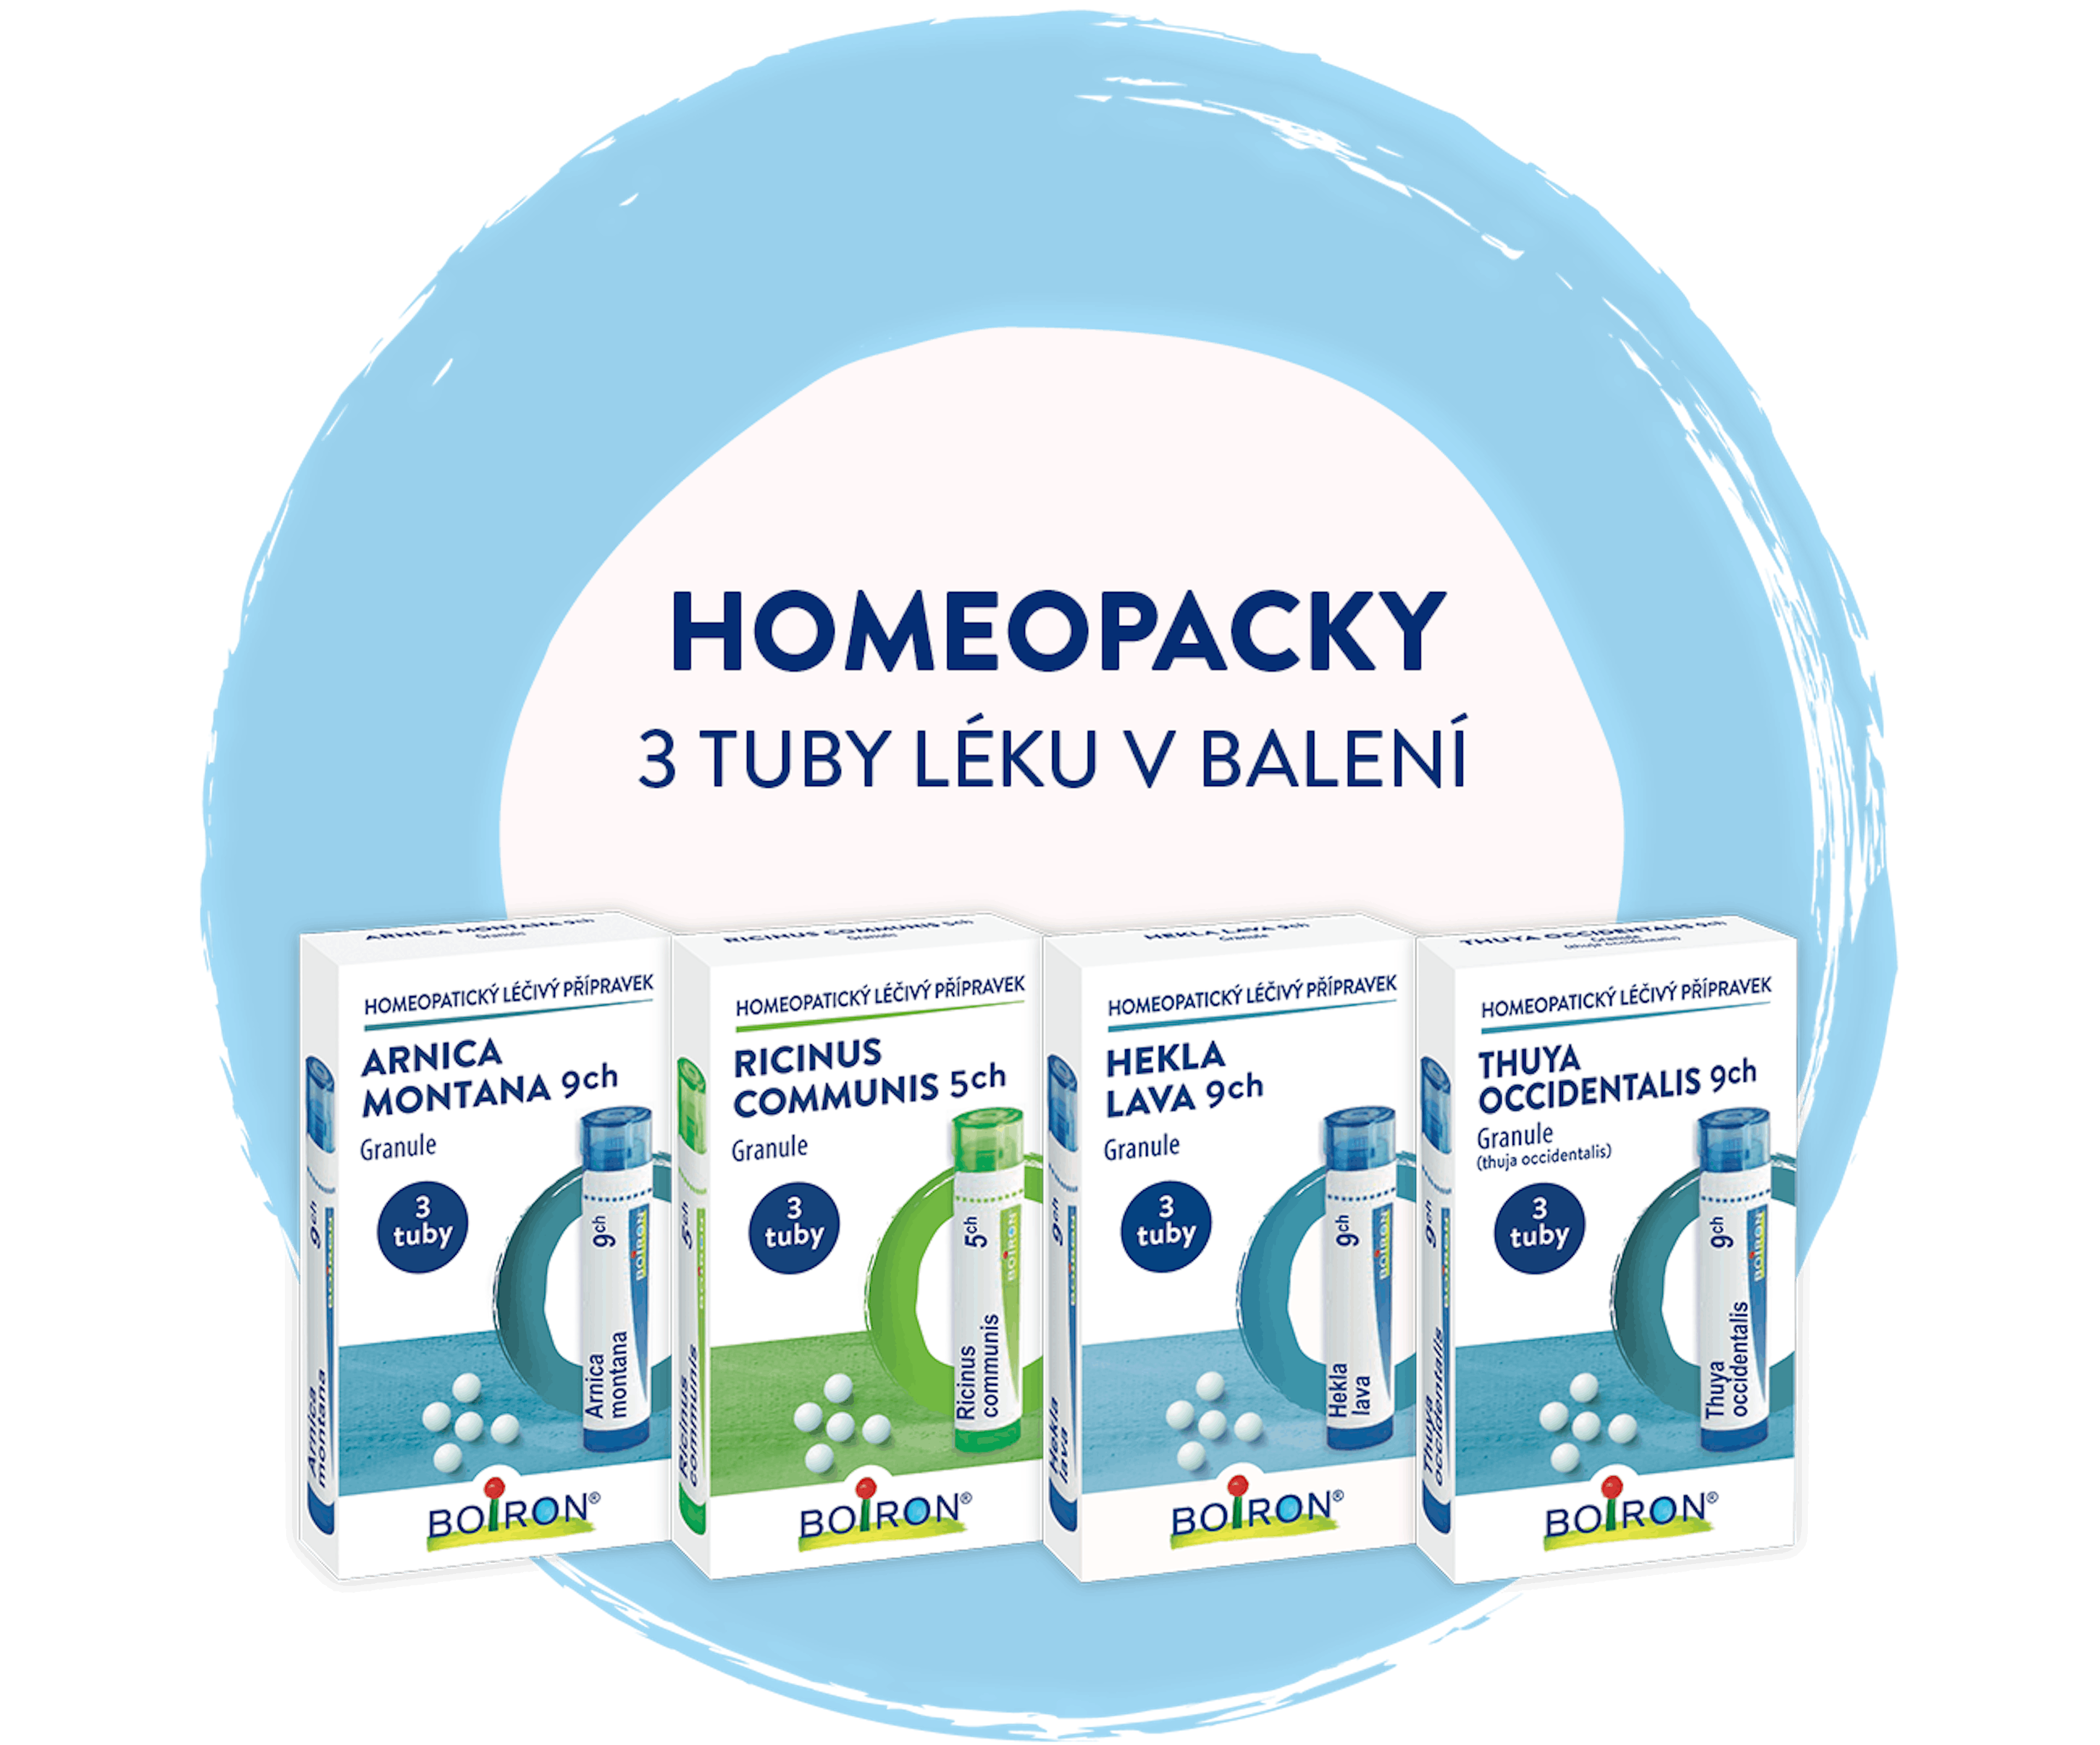 Homeopacky